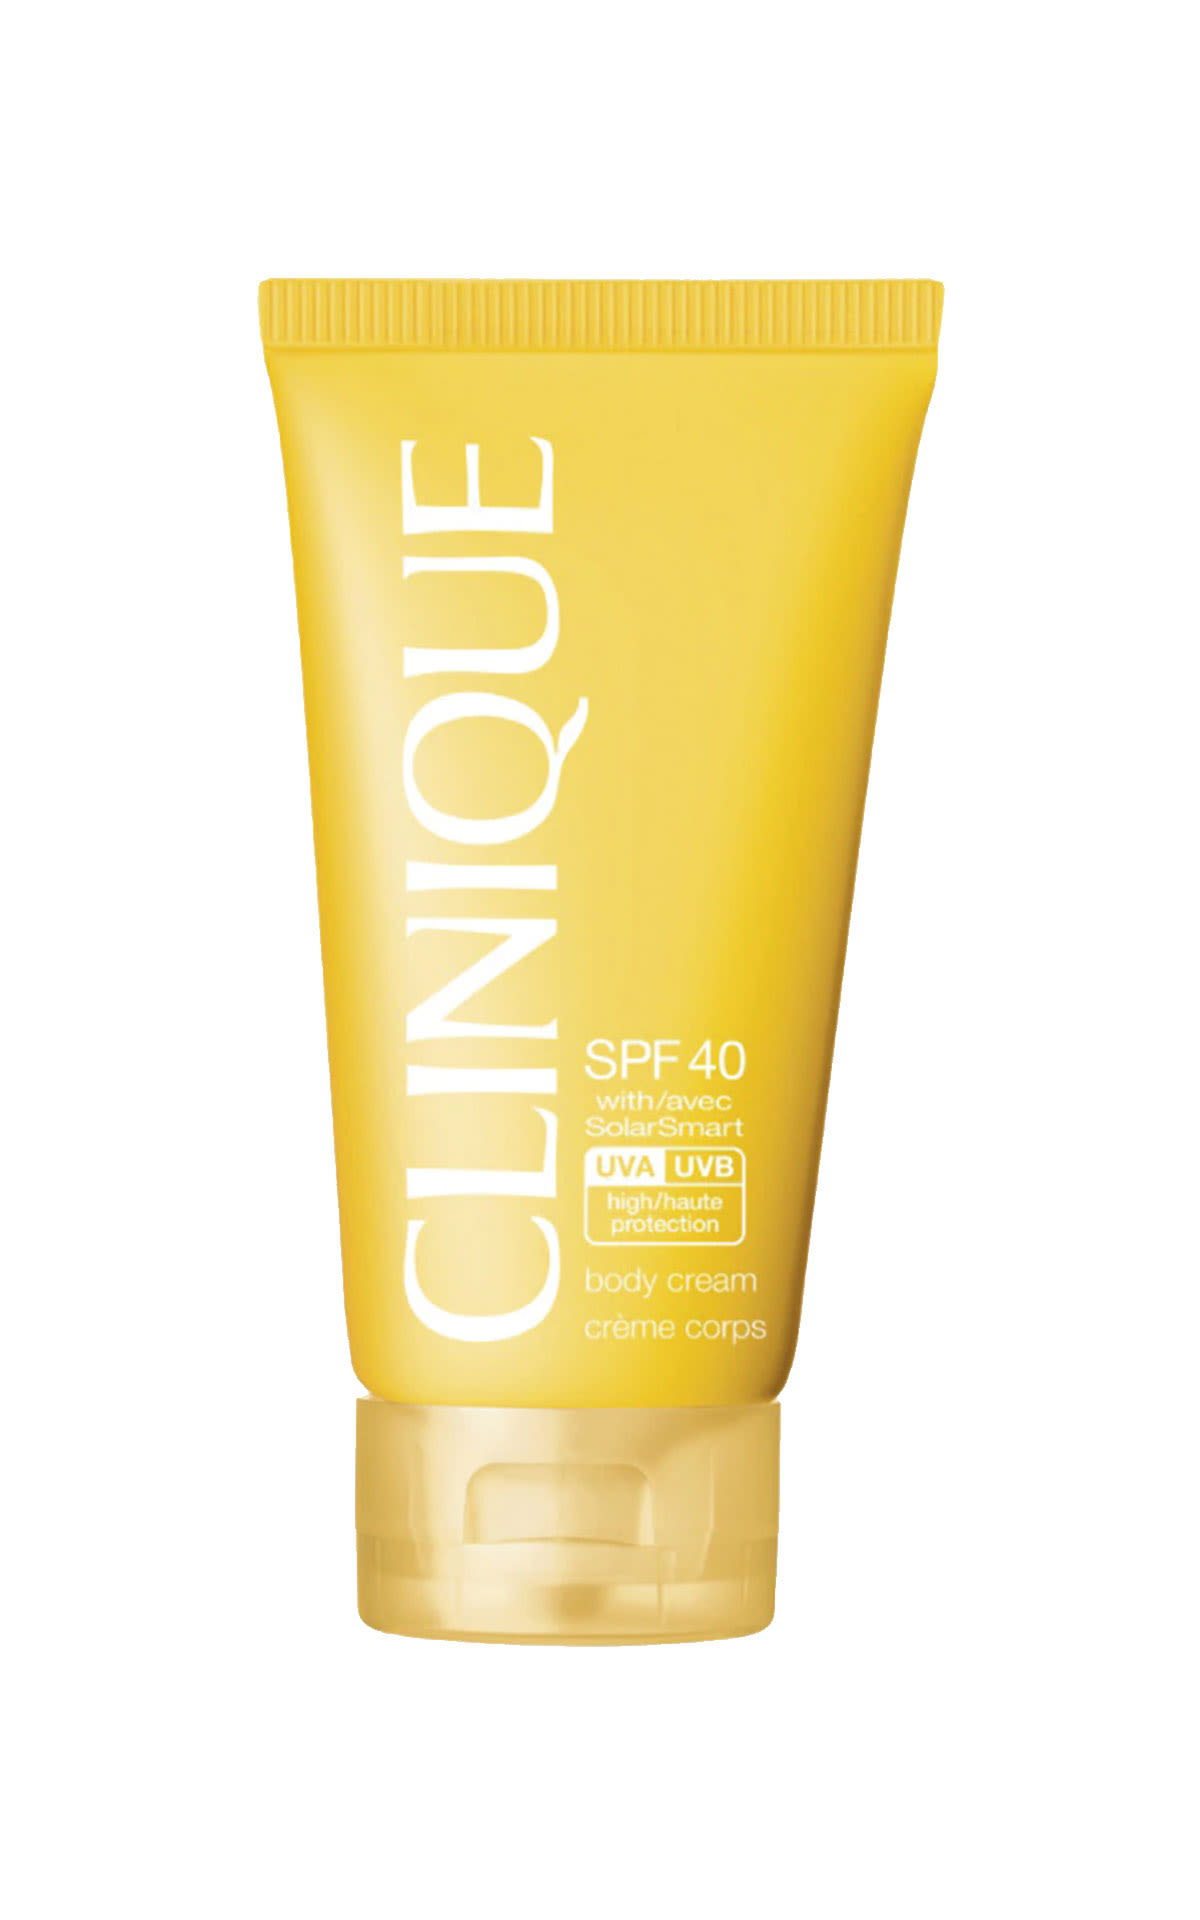 Clinique_Daily_hydration_set